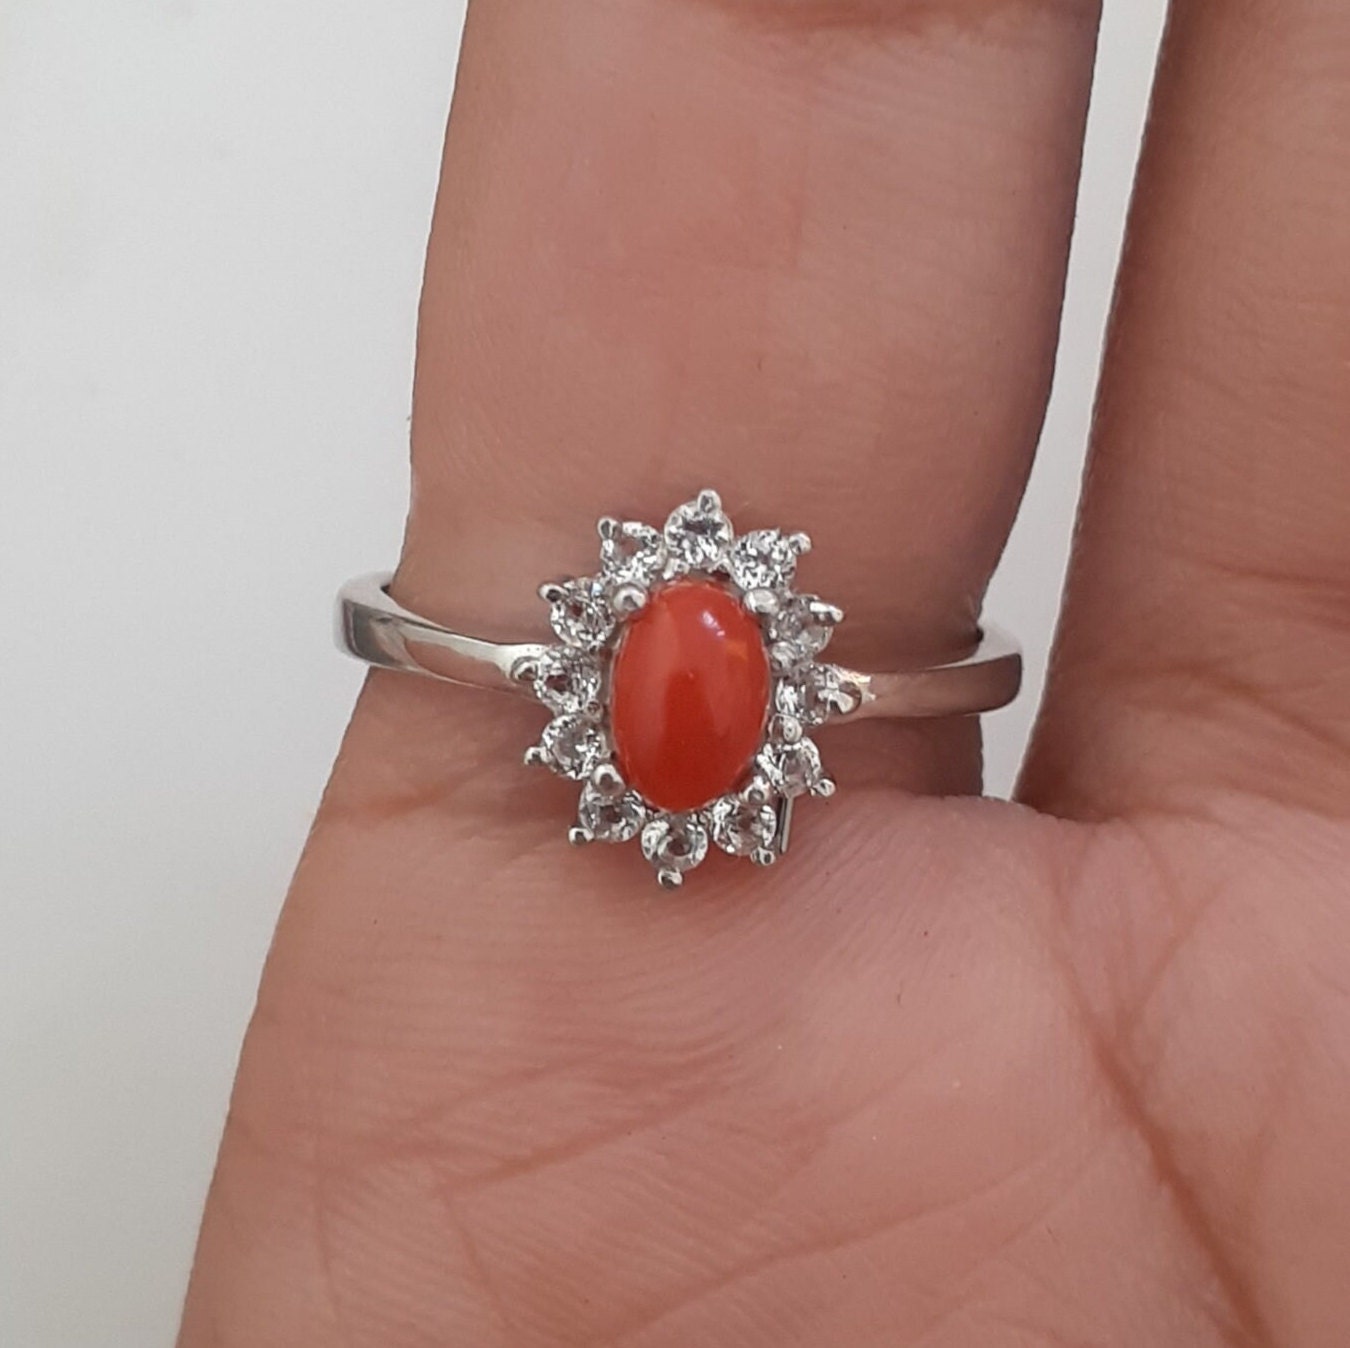 Buy Coral Gold Ring Online In India - Etsy India